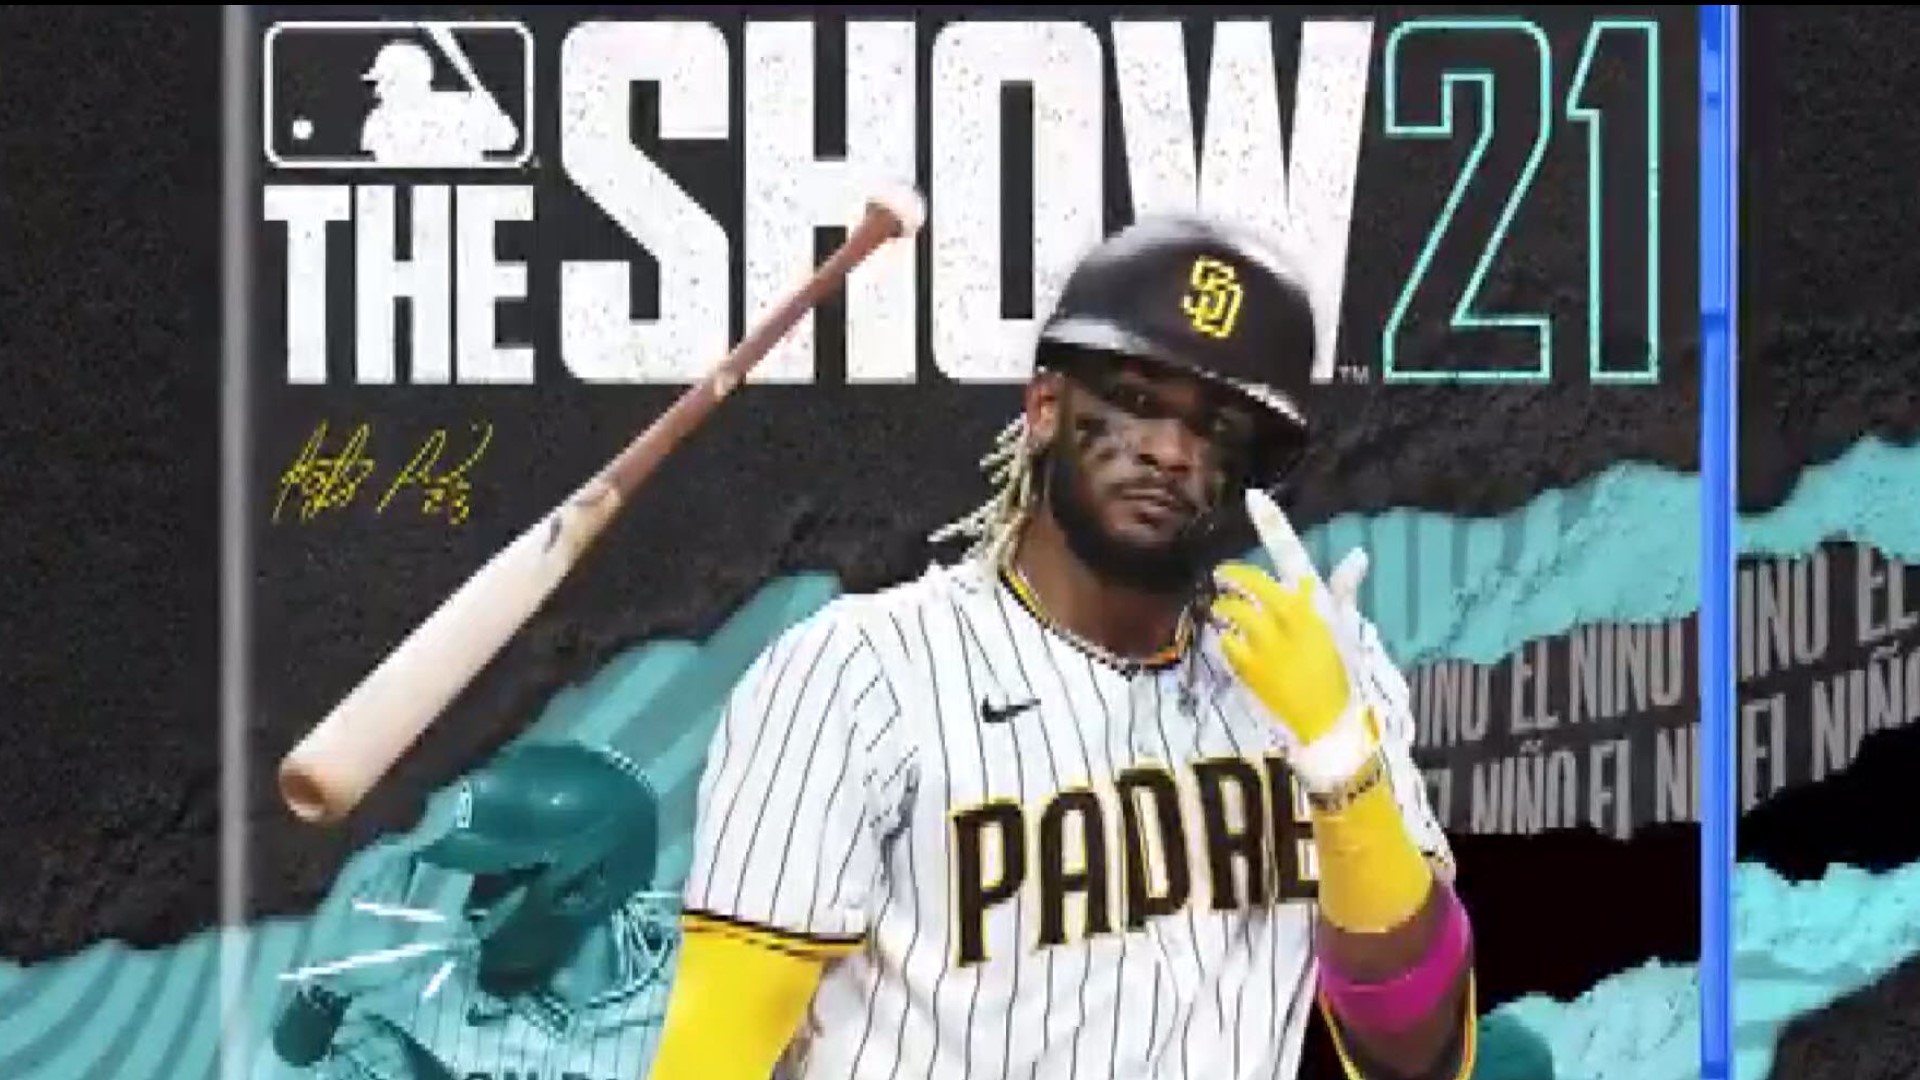 Tatis is the youngest player featured and also the first San Diego Padres player featured on the cover of the game since its 2006 debut.